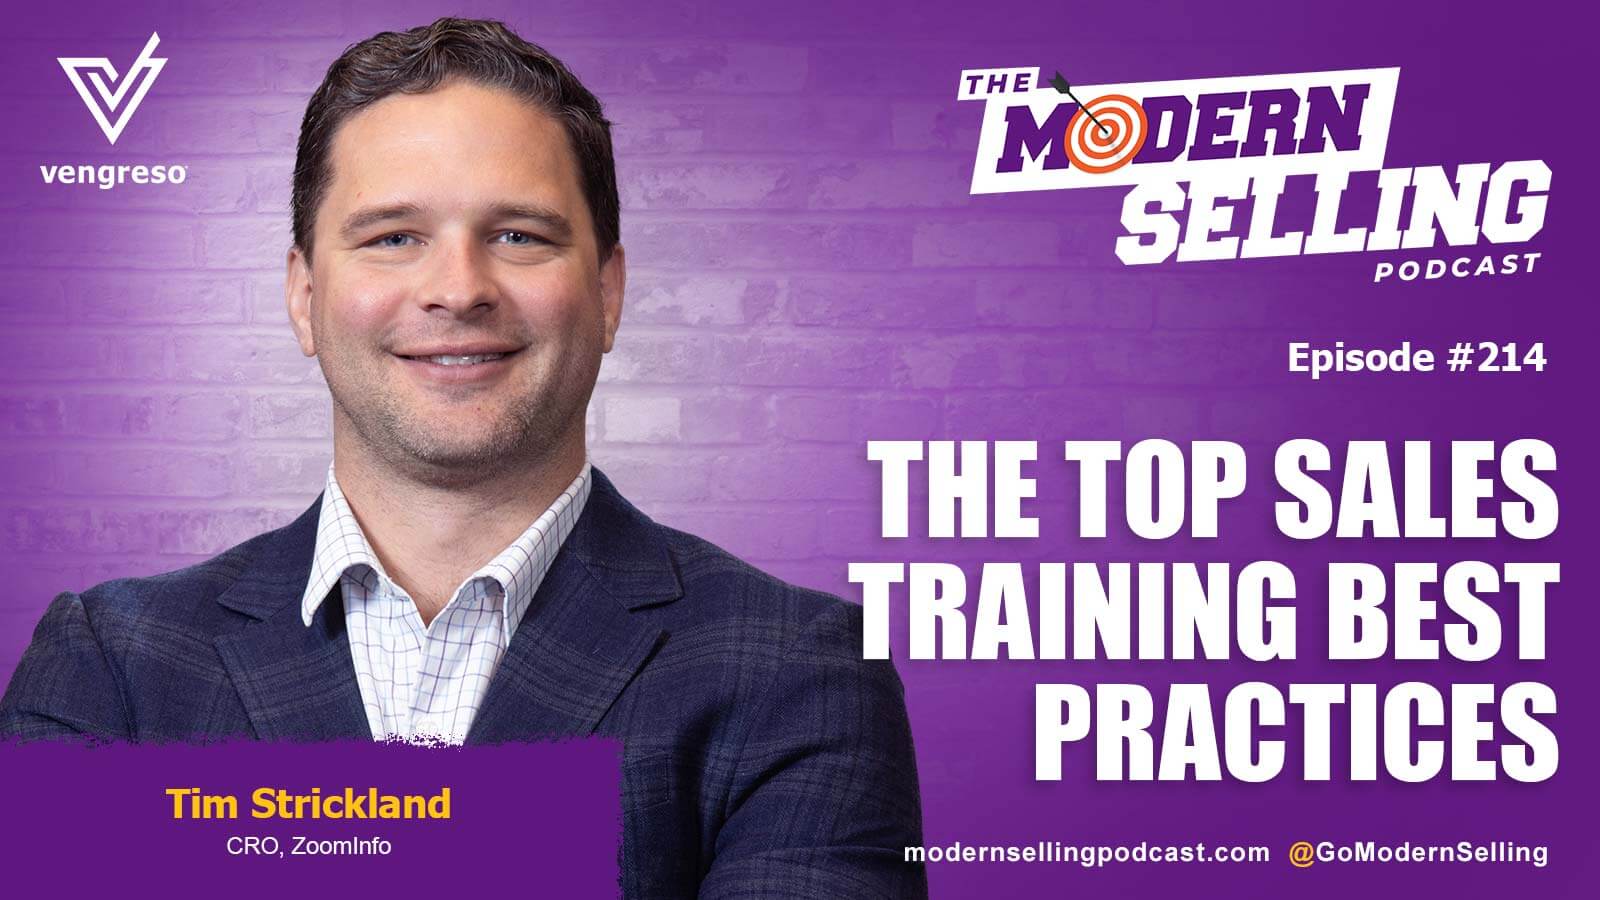 Tim Strickland on the Modern Selling Podcast